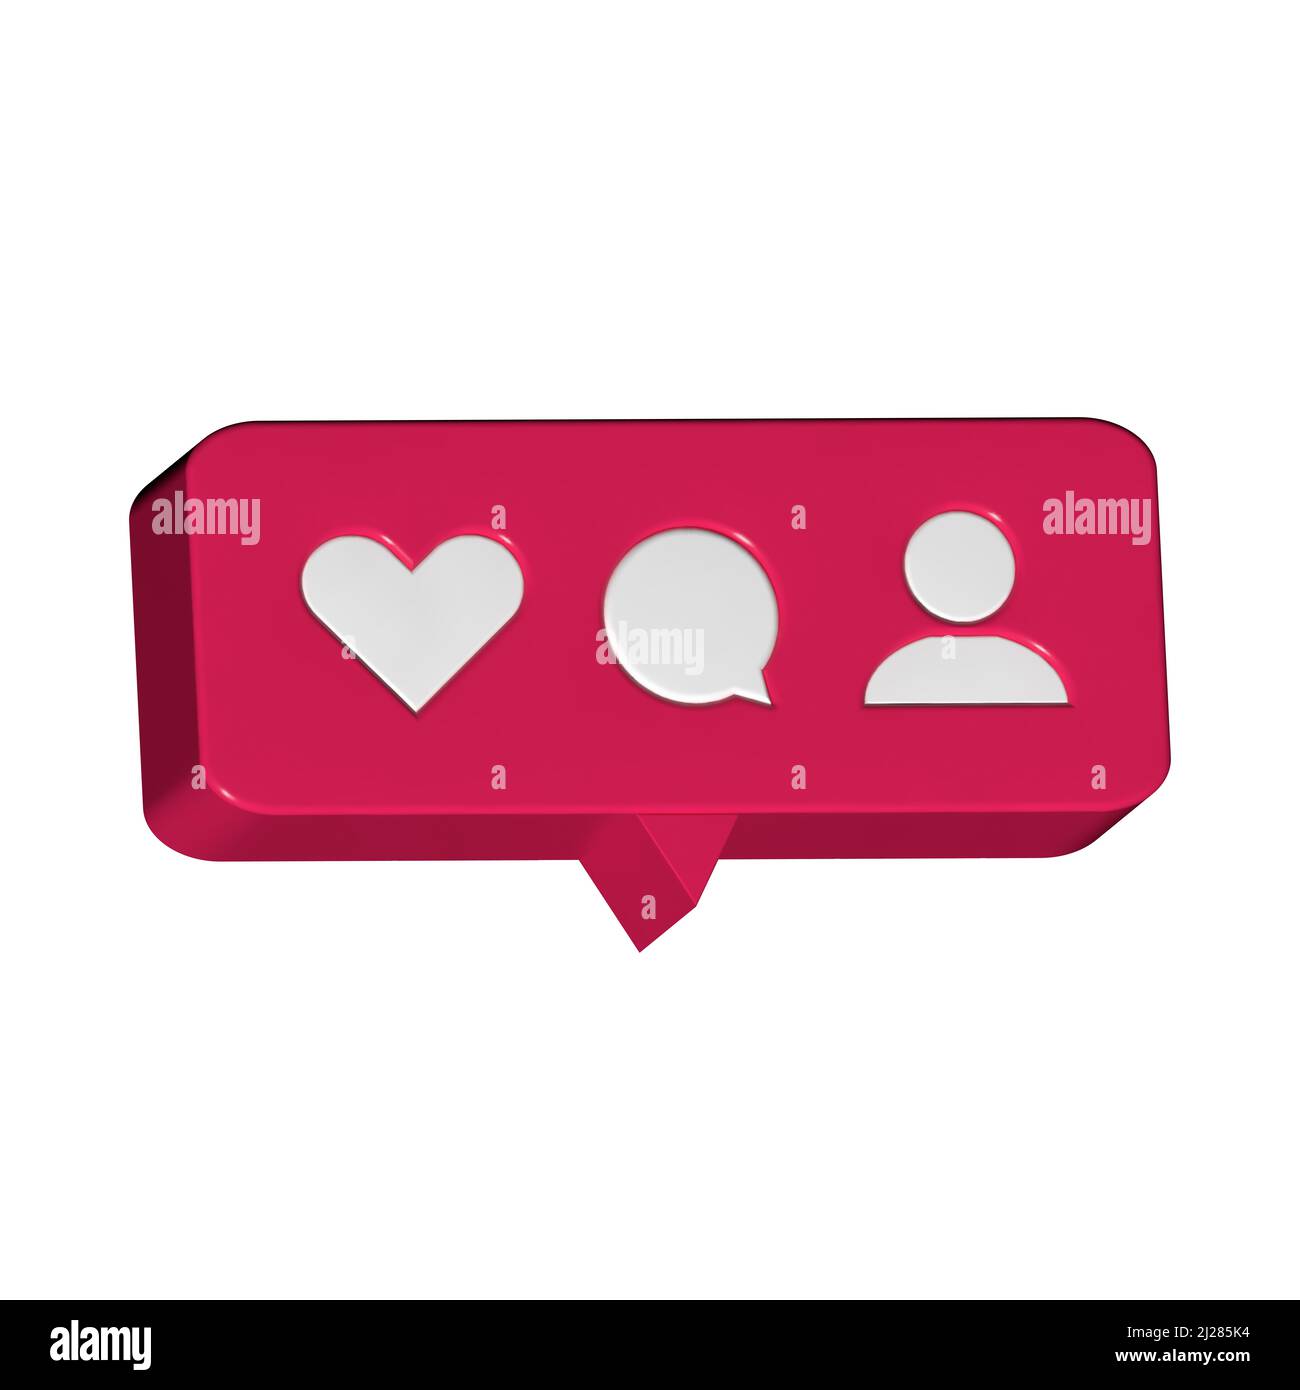 Social media notification icon. Follow, comment, like icons on a red background 3d design. Stock Photo